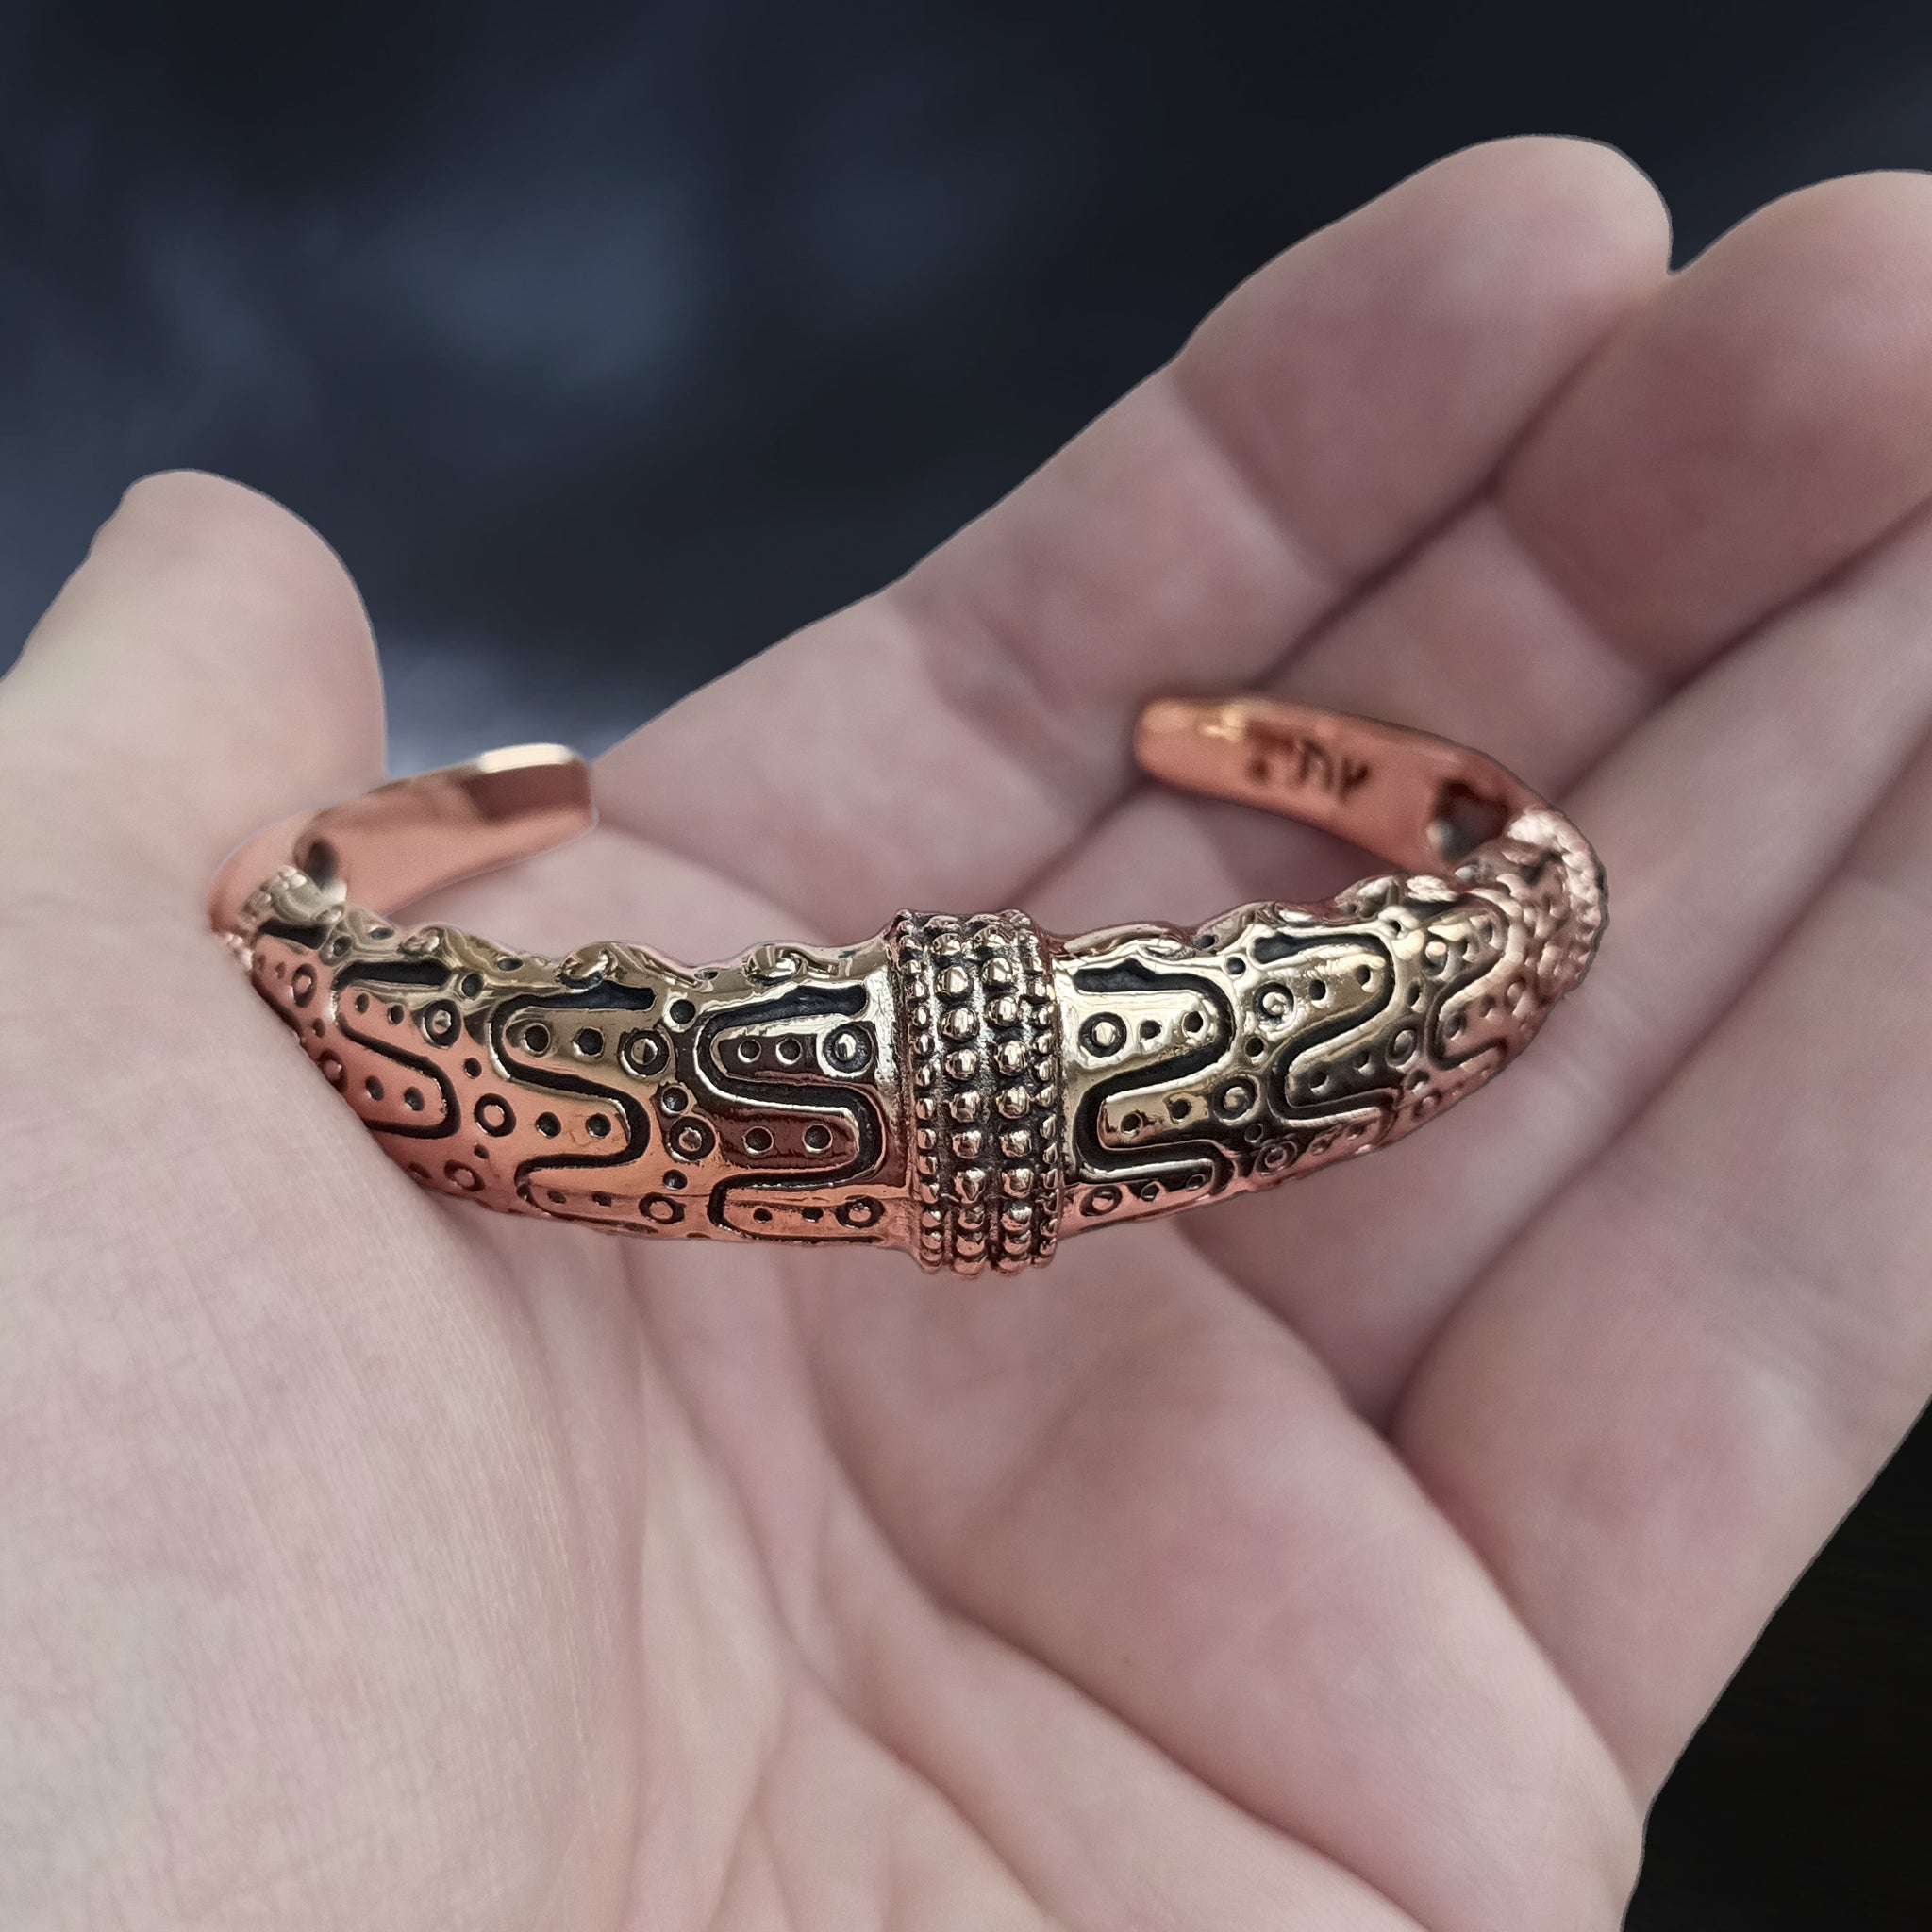 Danish Viking Bronze Bracelet from Falster in Hand - Front View